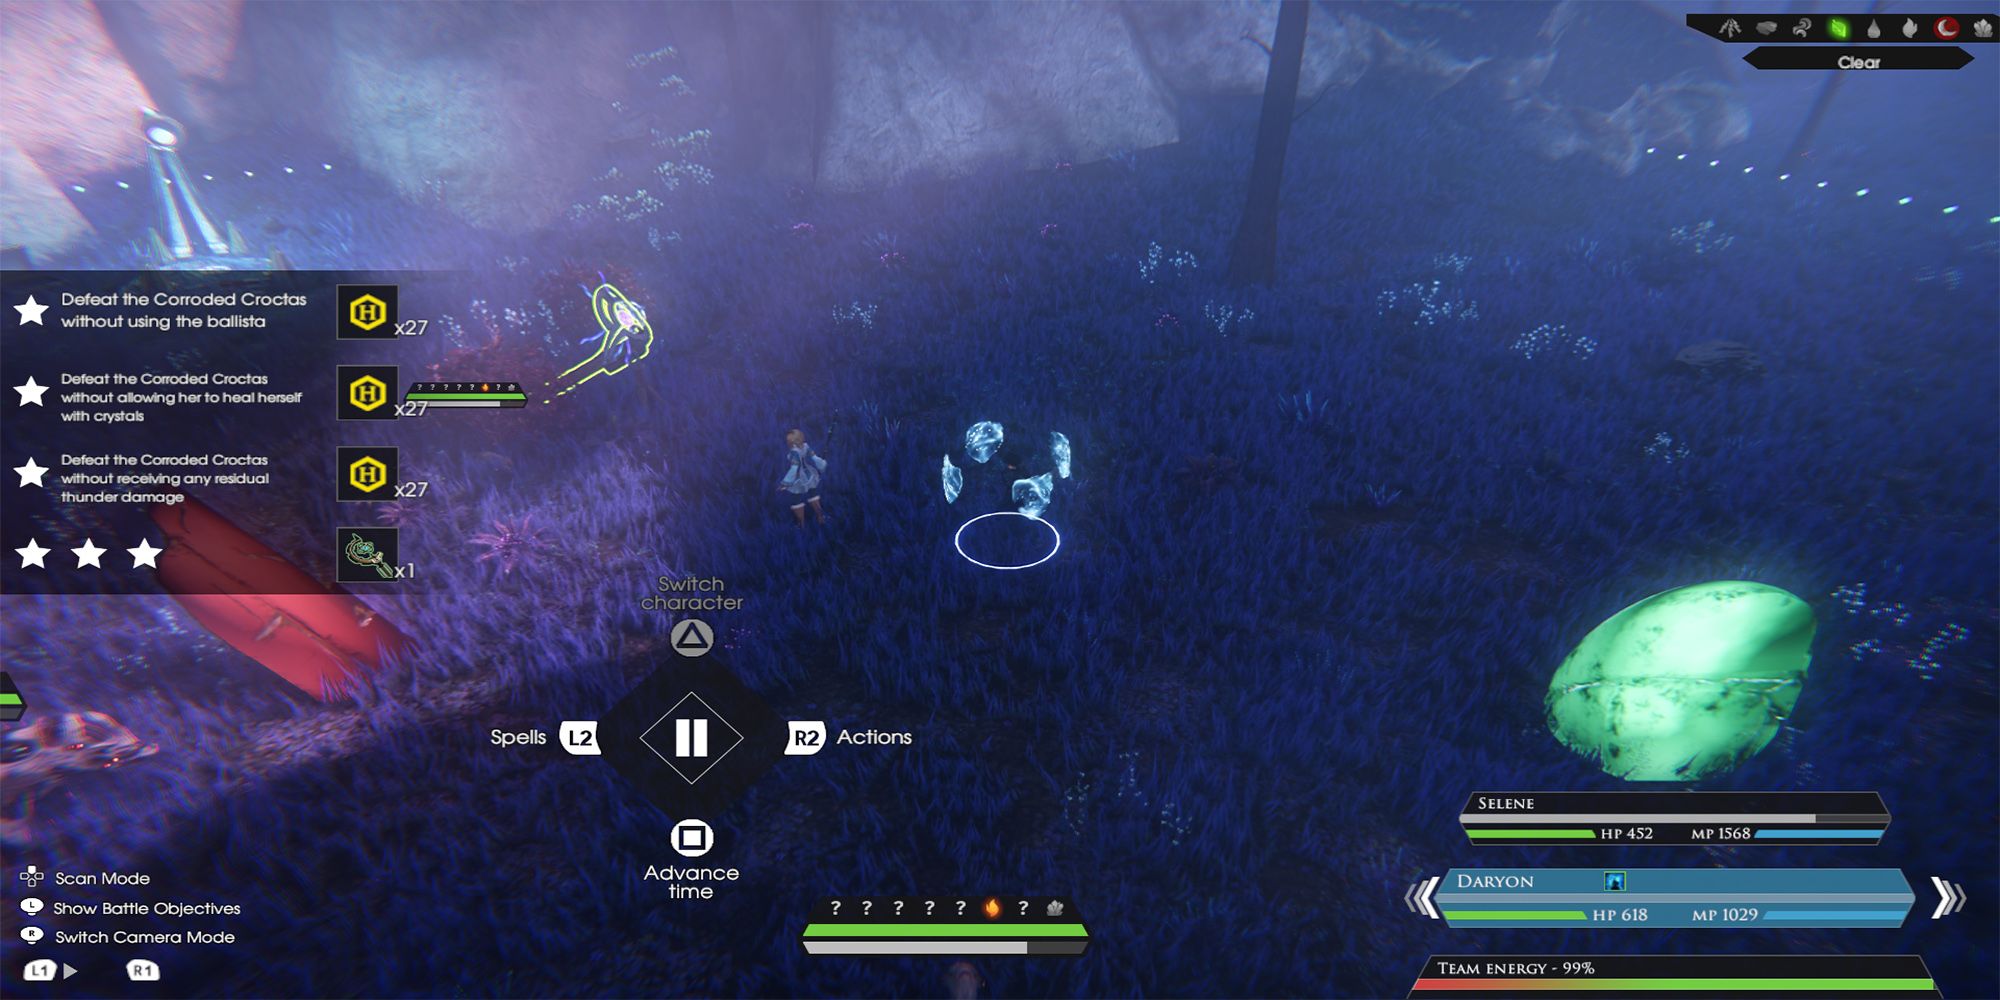 Daryon and Selene stand between a ballista and a healing crystal while engaged in battle in Crelk Forest in Edge of Eternity.